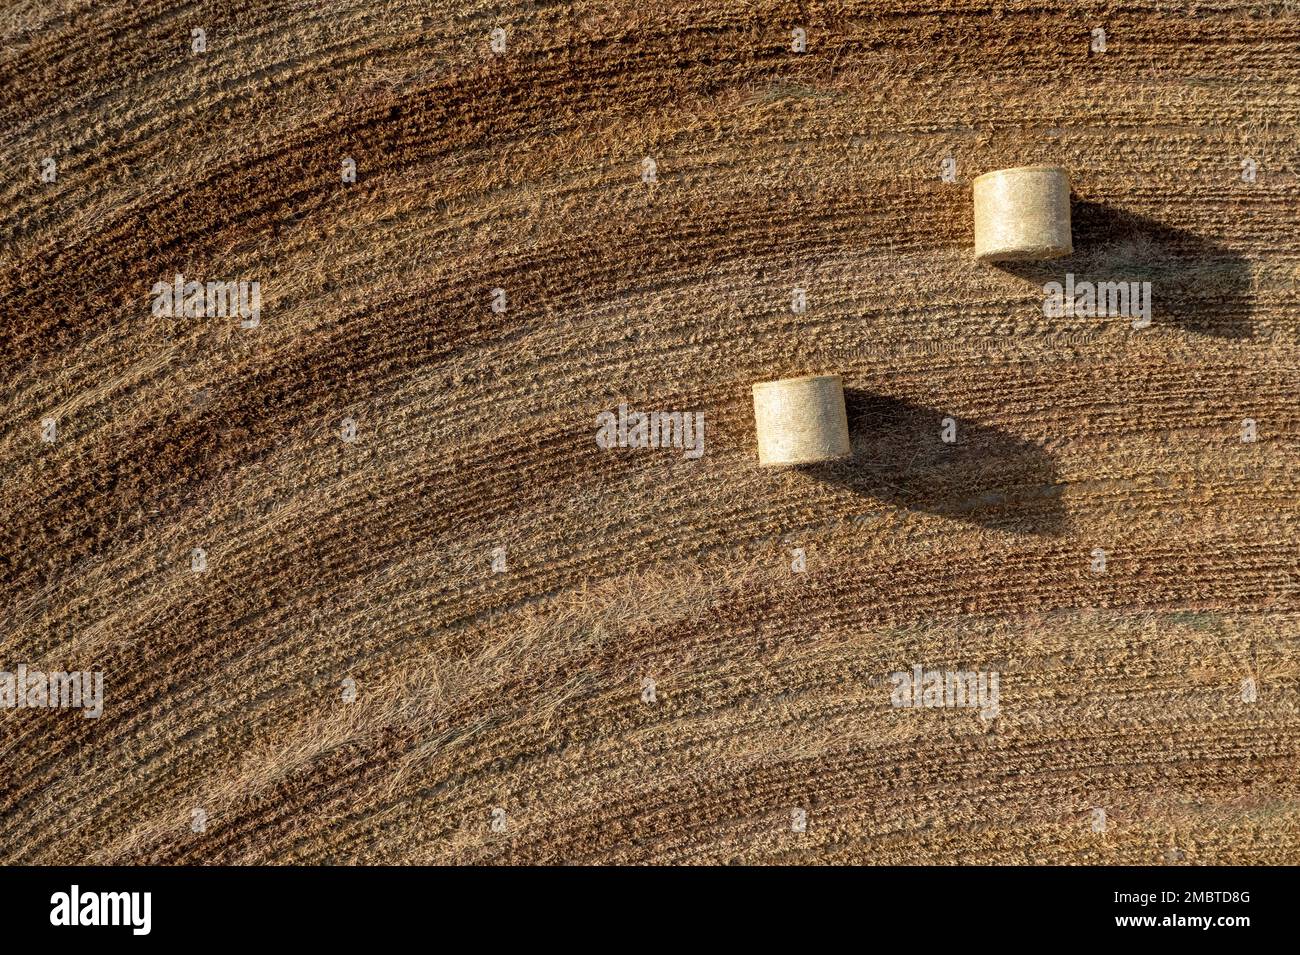 Drone aerial of hay bales in agriculture field after harvesting. Cyprus europe Stock Photo